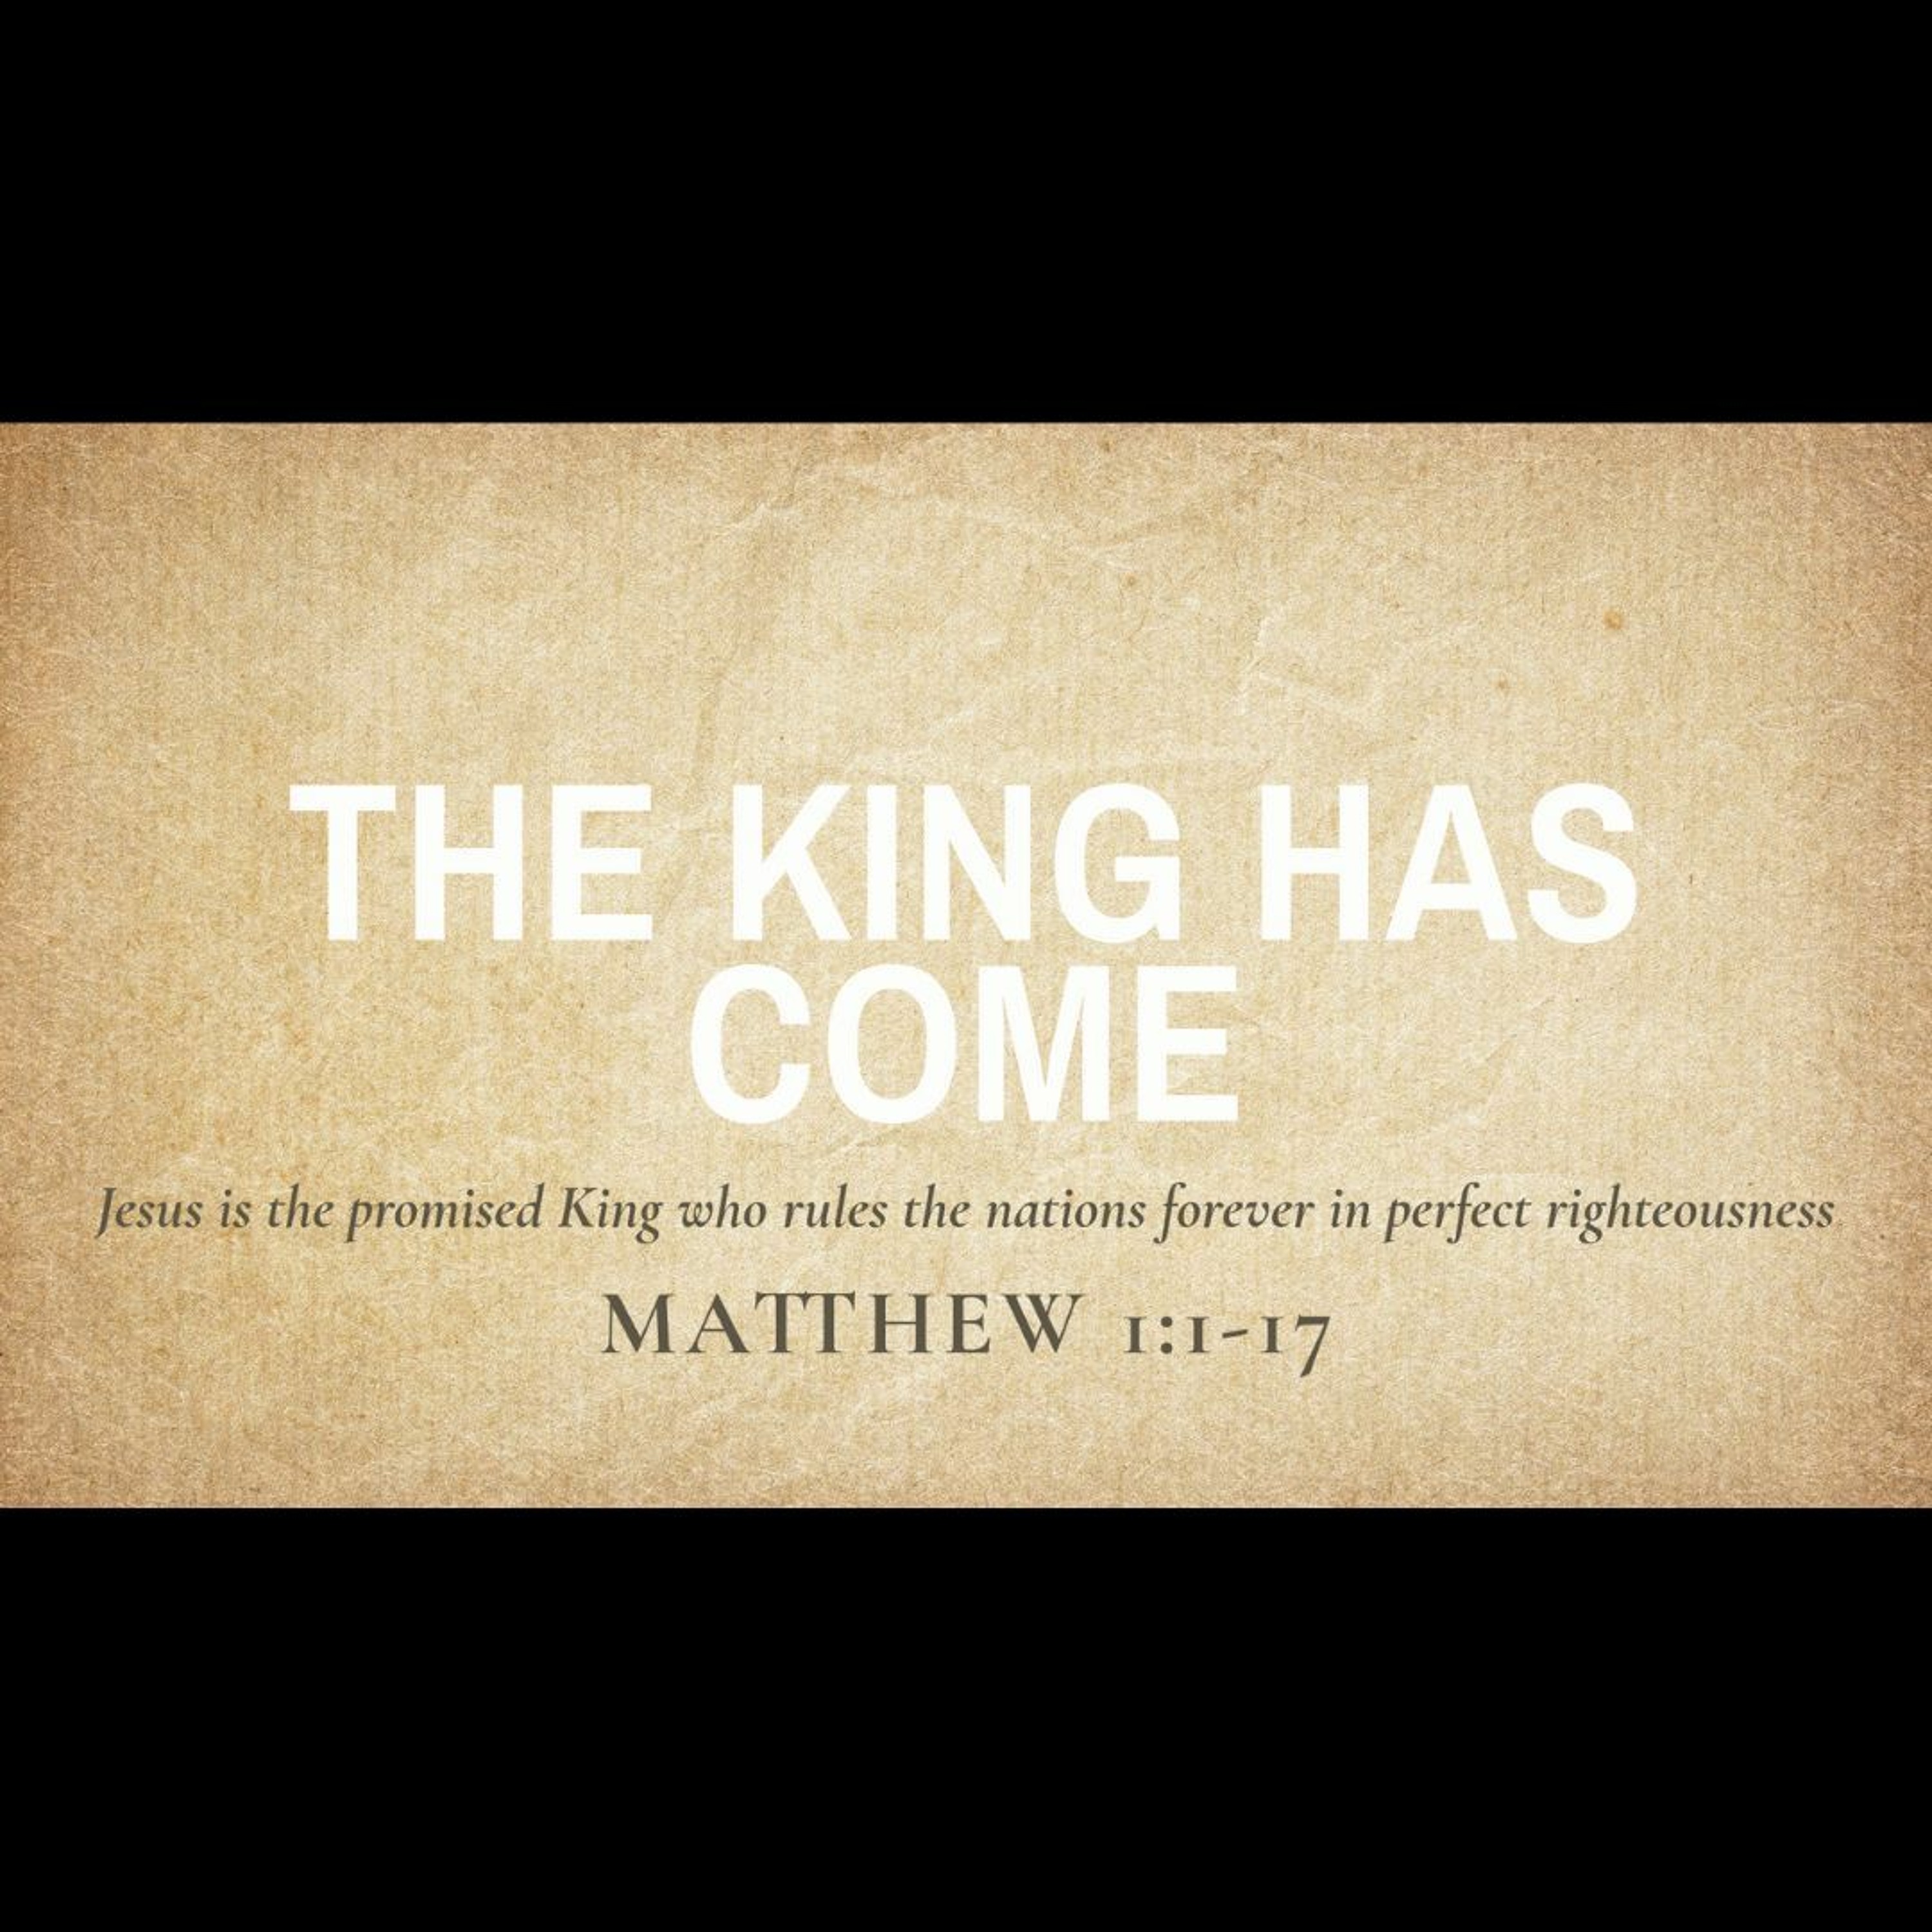 The King Has Come (Matthew 1:1-17)